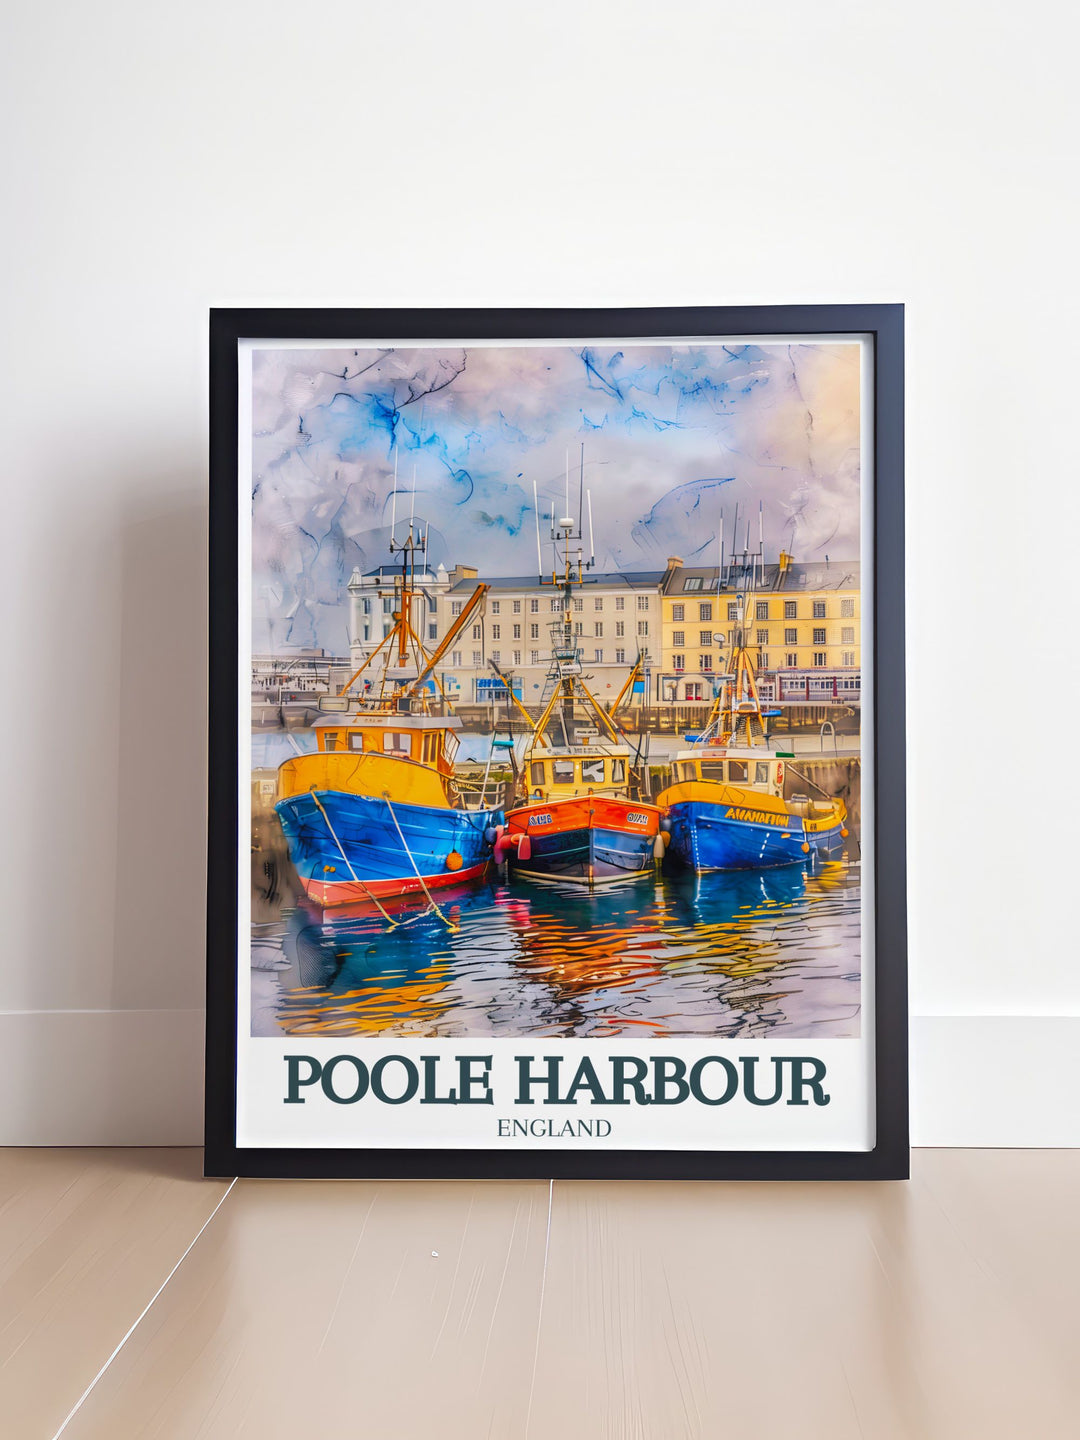 Gorgeous England poster of Poole Harbour with Borough of Poole Holes Bay in vibrant colors perfect for adding a touch of elegance to any room and making a great travel gift for England lovers